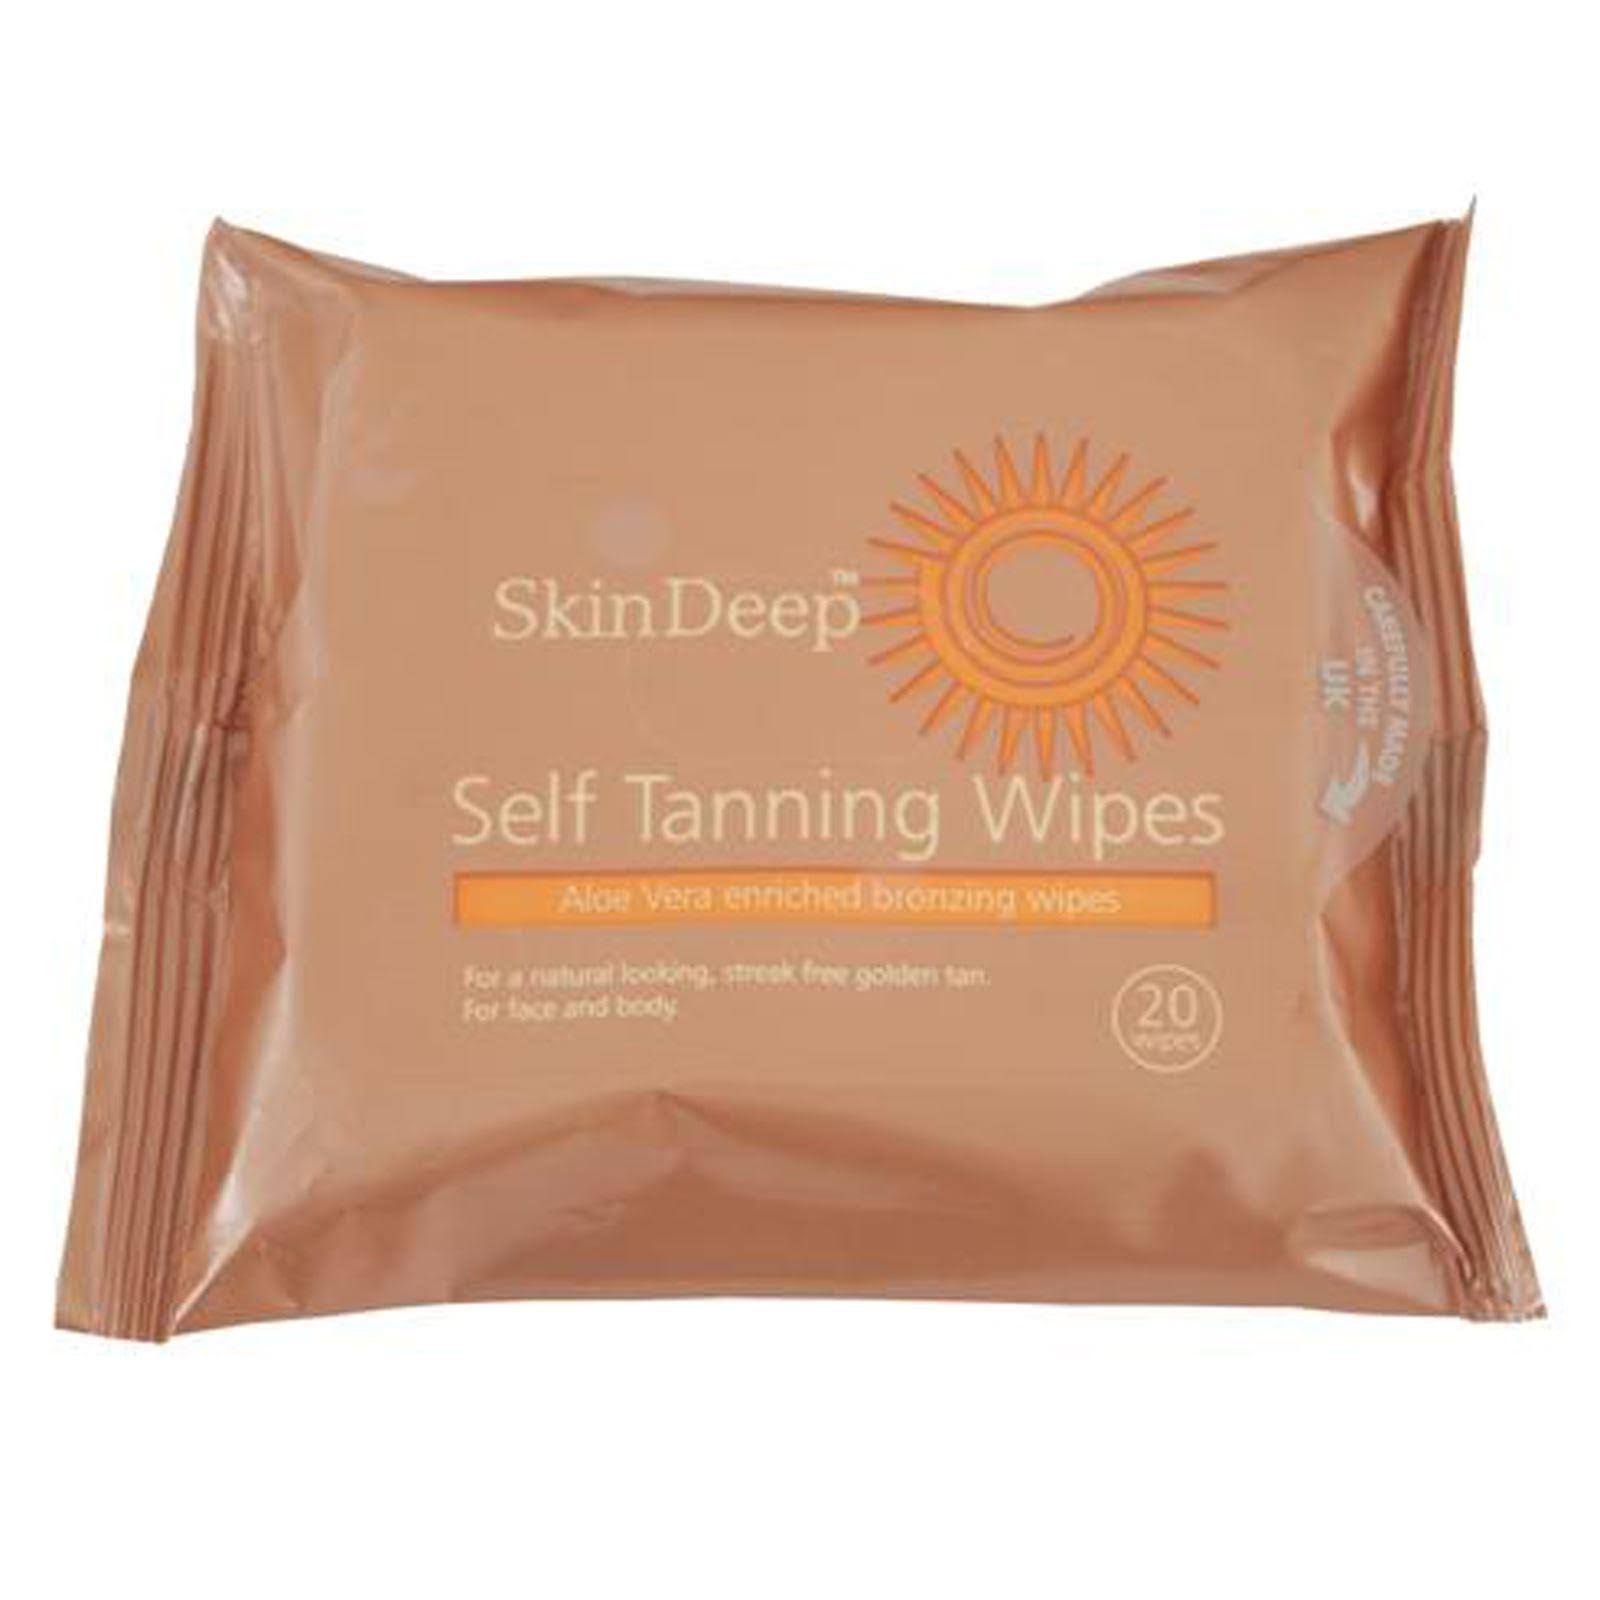 Skindeep Self Tanning Wipes - 20 Pack